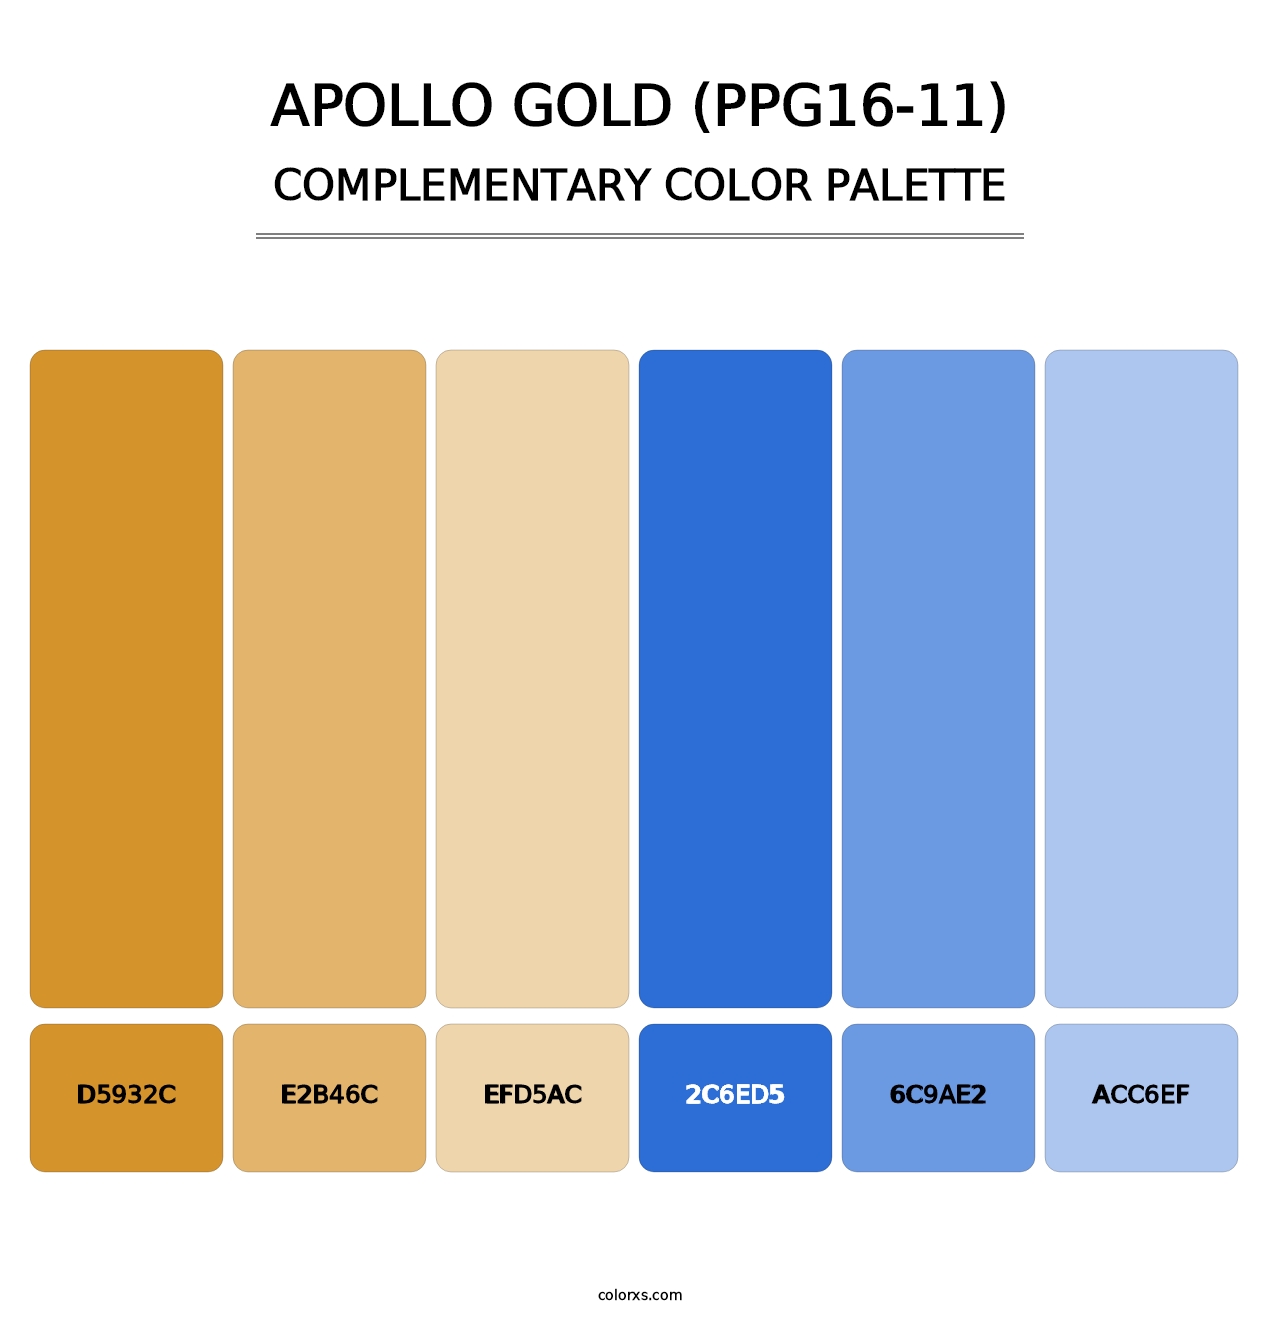 Apollo Gold (PPG16-11) - Complementary Color Palette